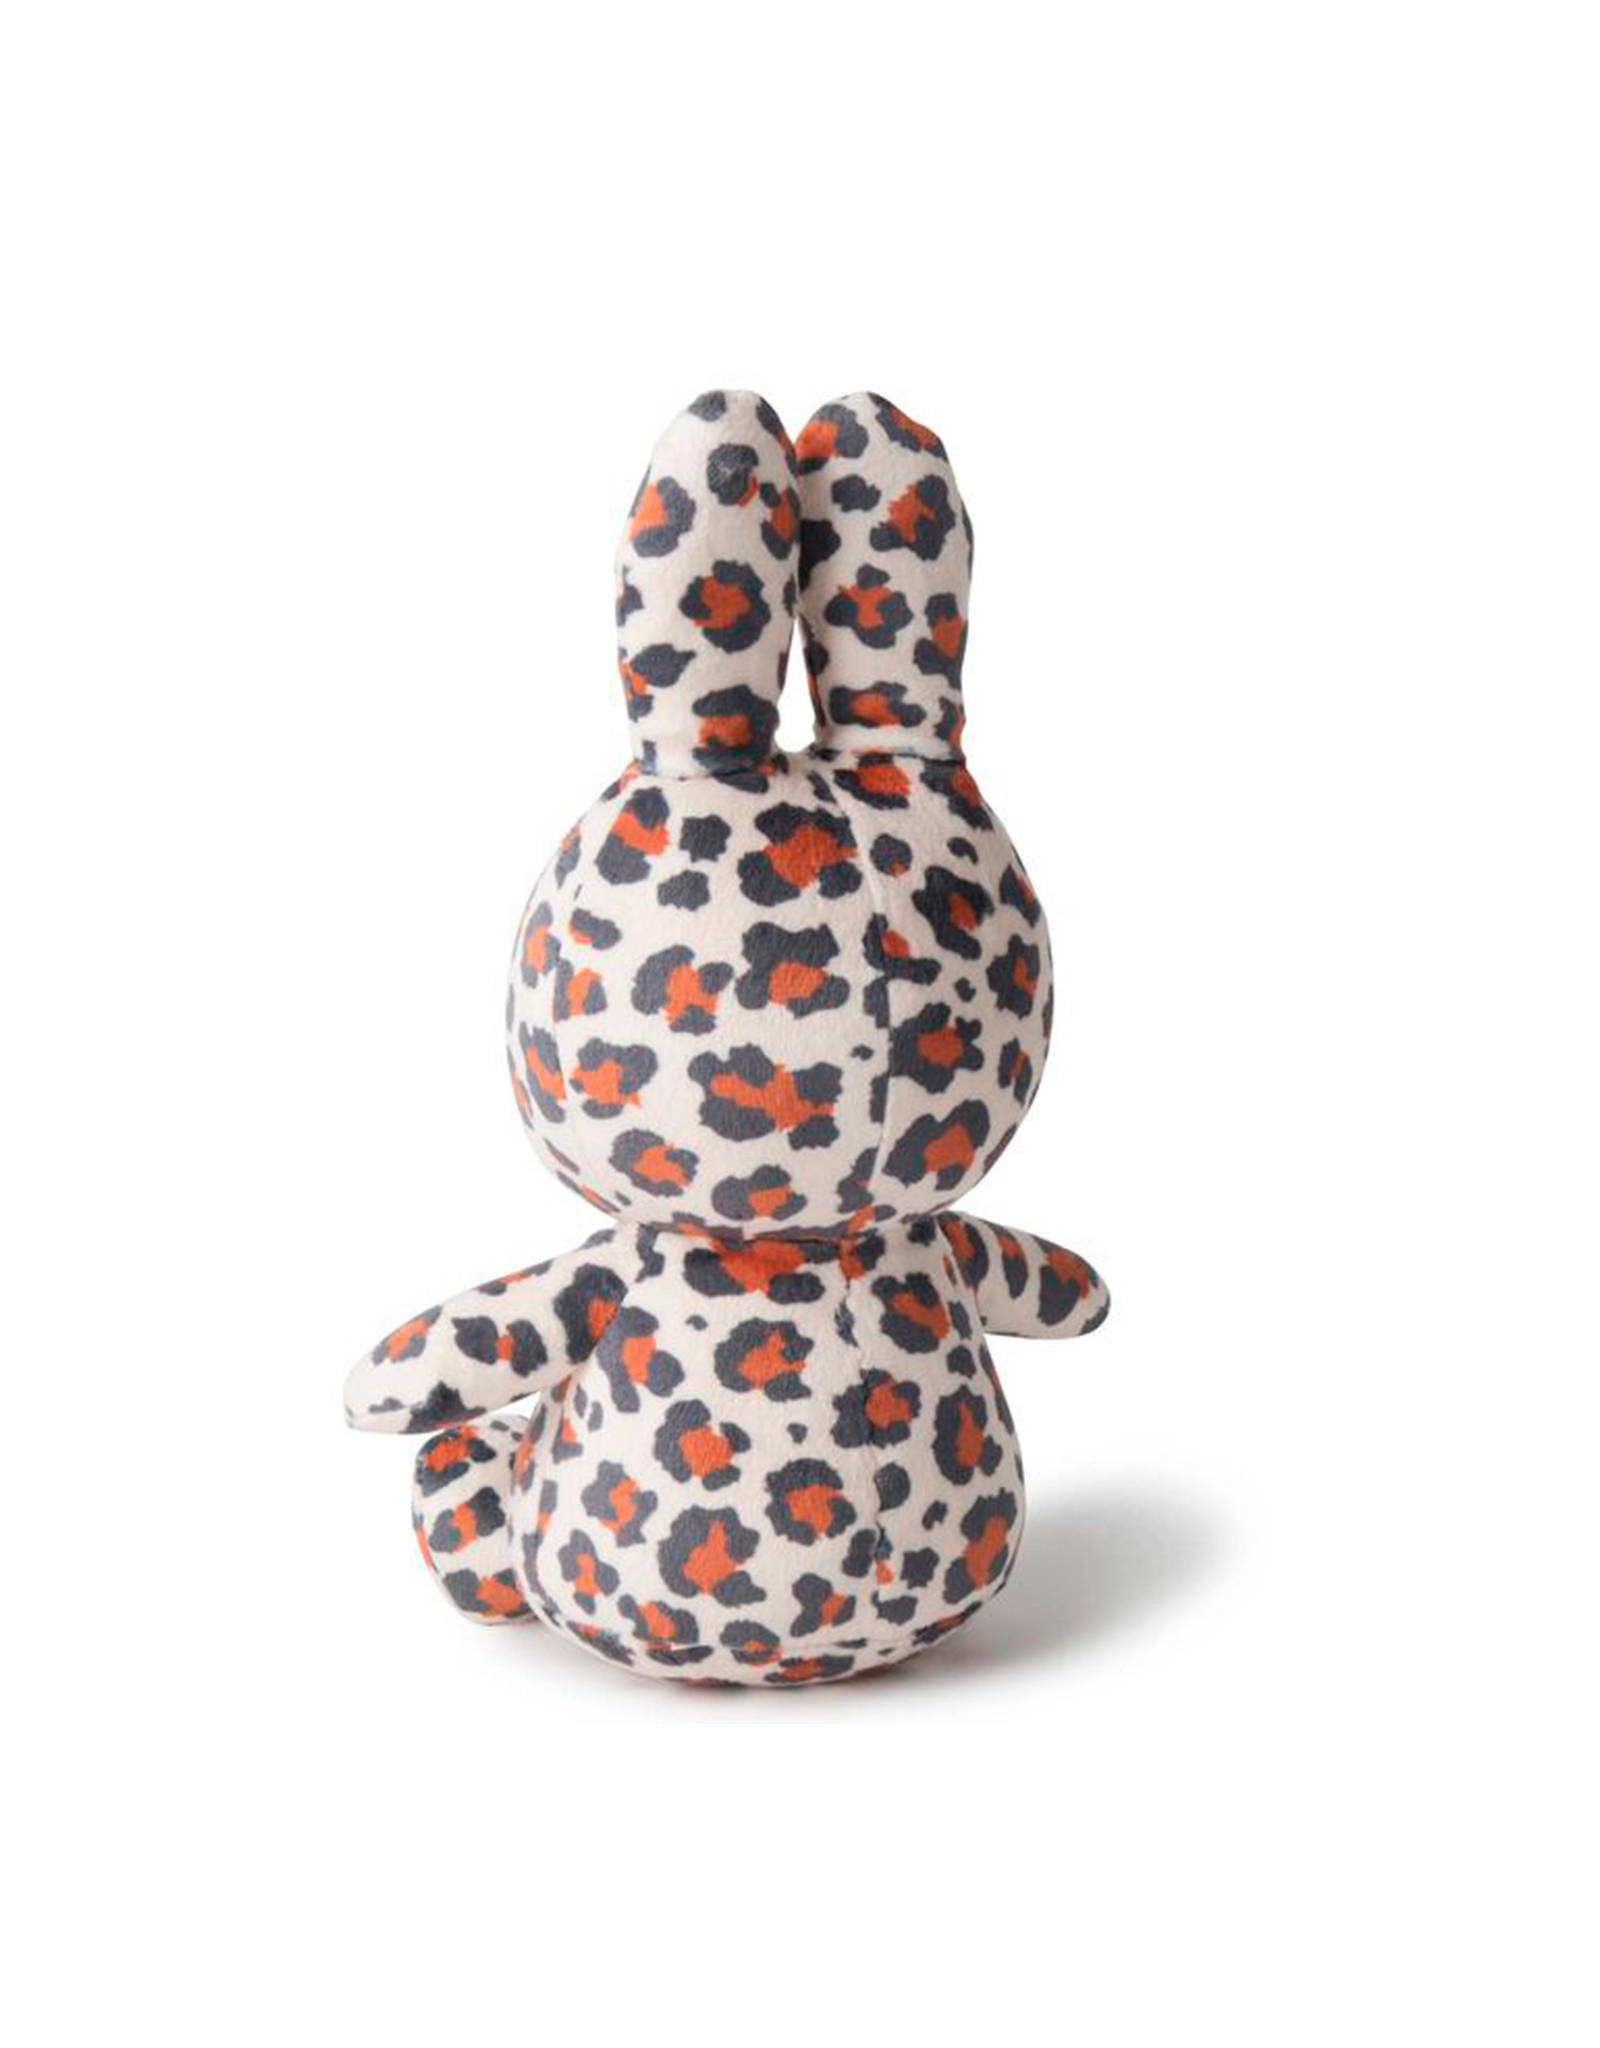 Sitting all-over Leopard print - 23 cm